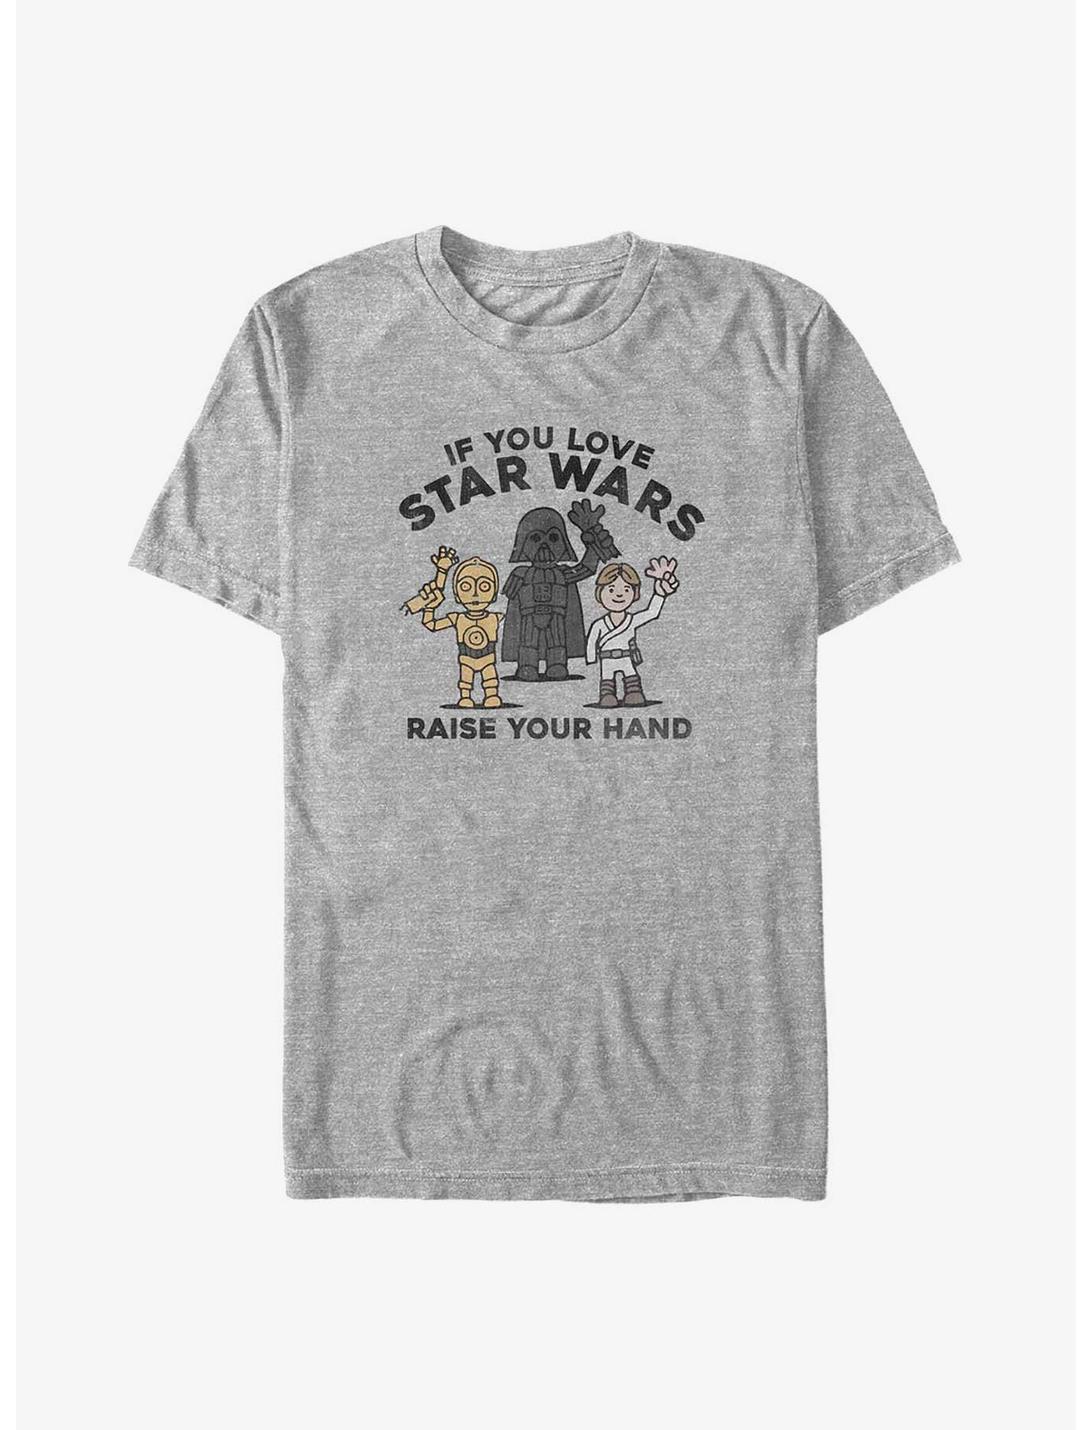 Star Wars Raise Your Hands If You Love Star Wars Big & Tall T-Shirt, ATH HTR, hi-res